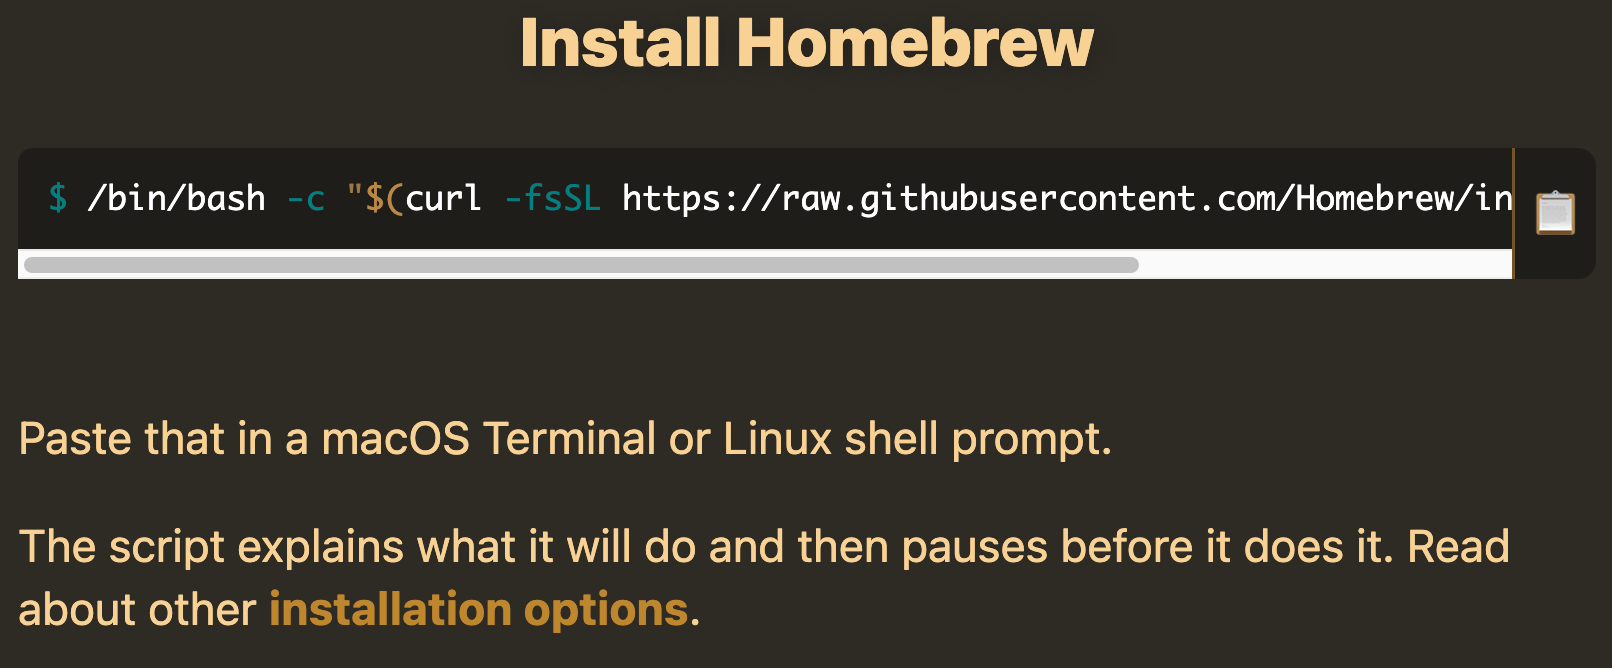 It shows a page of installation instructions for homebrew with a line to paste into your terminal